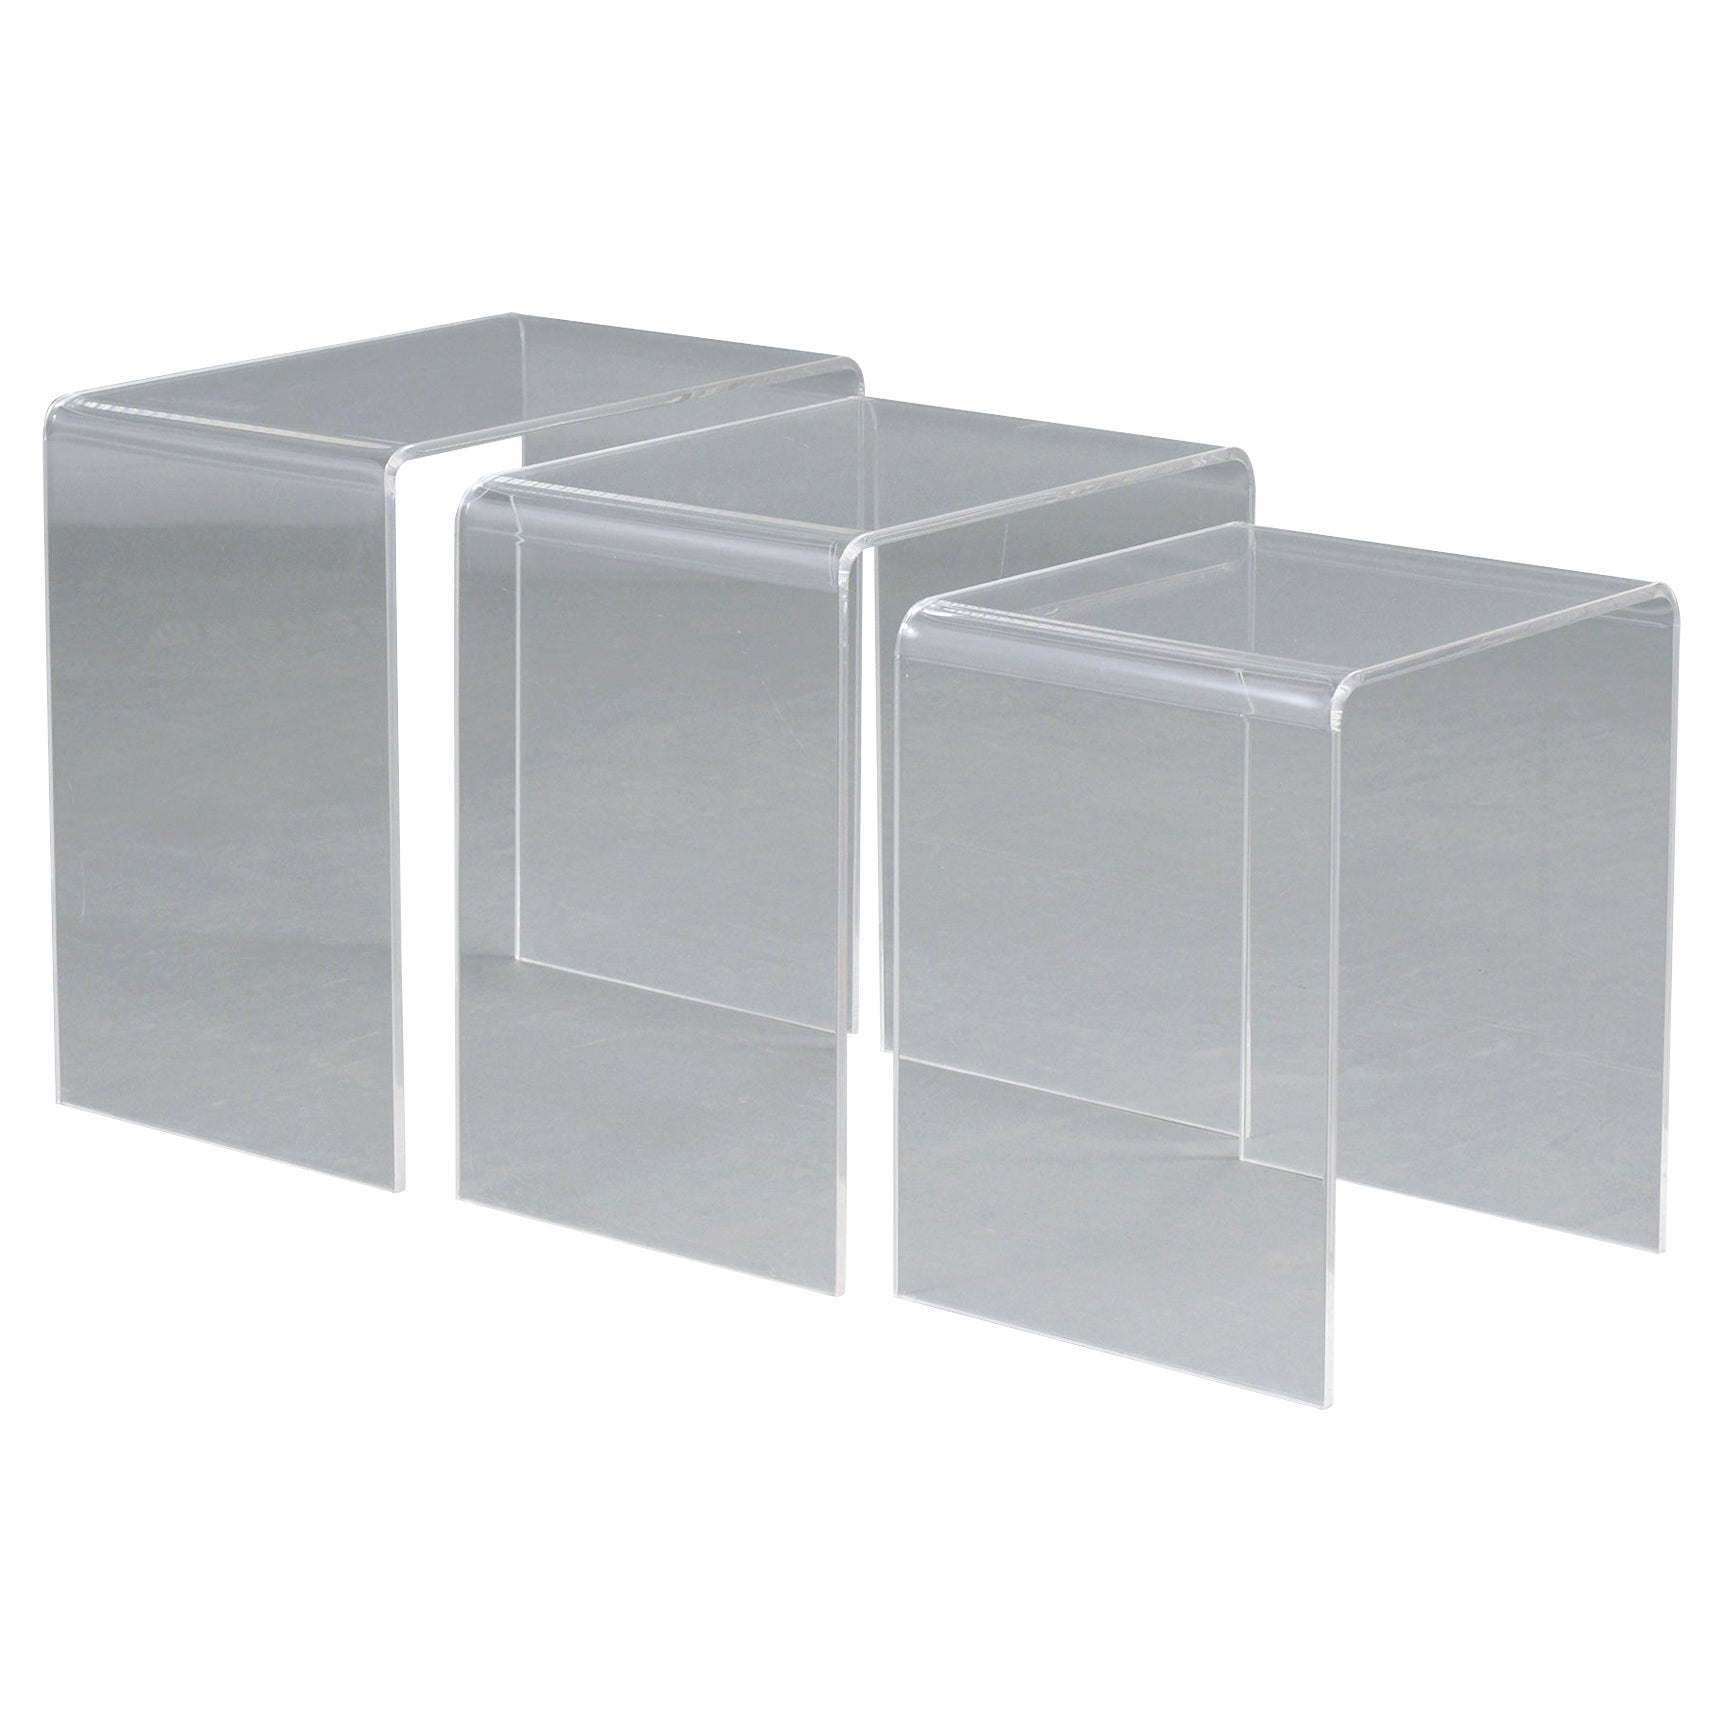 Three Lucite Stacking Tables